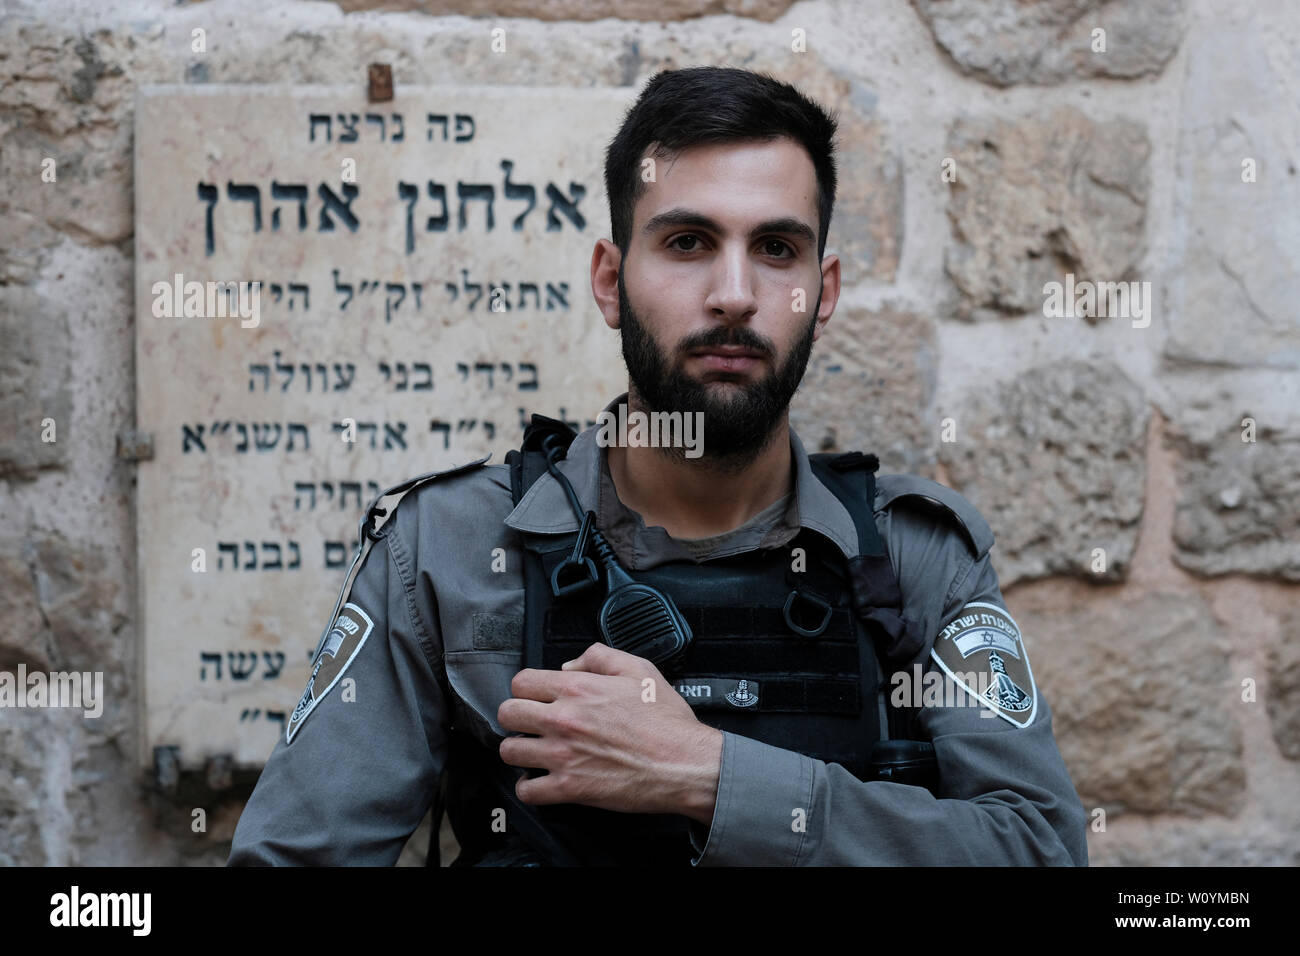 An Israeli border policeman stands guard in front of a plaque in memory of Elhanan Aharon, a young Jewish student in the 'Ateret Cohanim' Yeshiva who was murdered by Palestinians in 1991 while walking on El Wad also called Hagai Street in the old city of Jerusalem. Israel Stock Photo